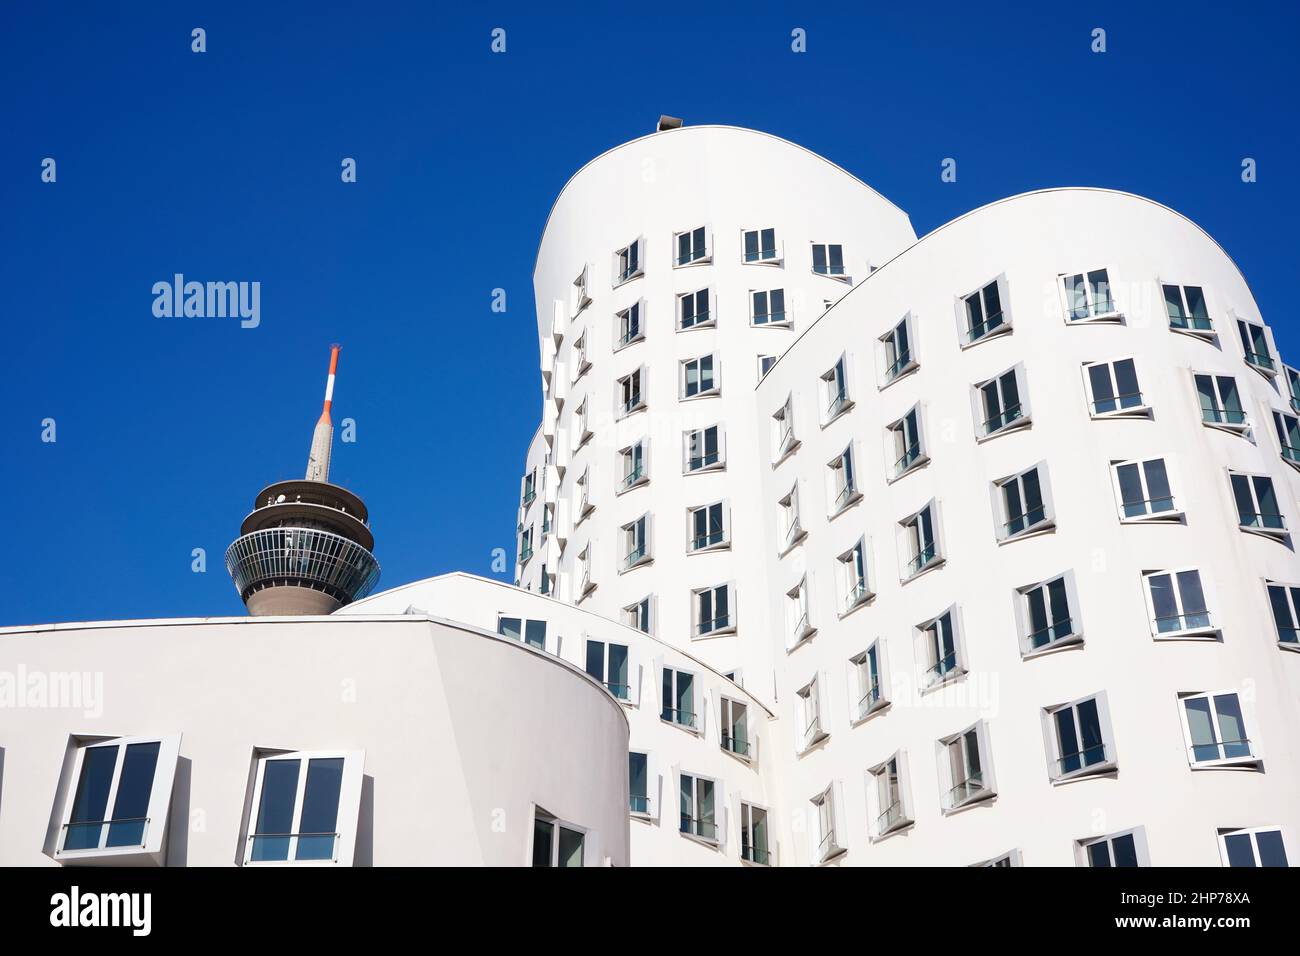 White buildings designed by the star architect Frank O. Gehry at 'Neuer Zollhof', Medienhafen, with Rhine Tower in the background. Stock Photo